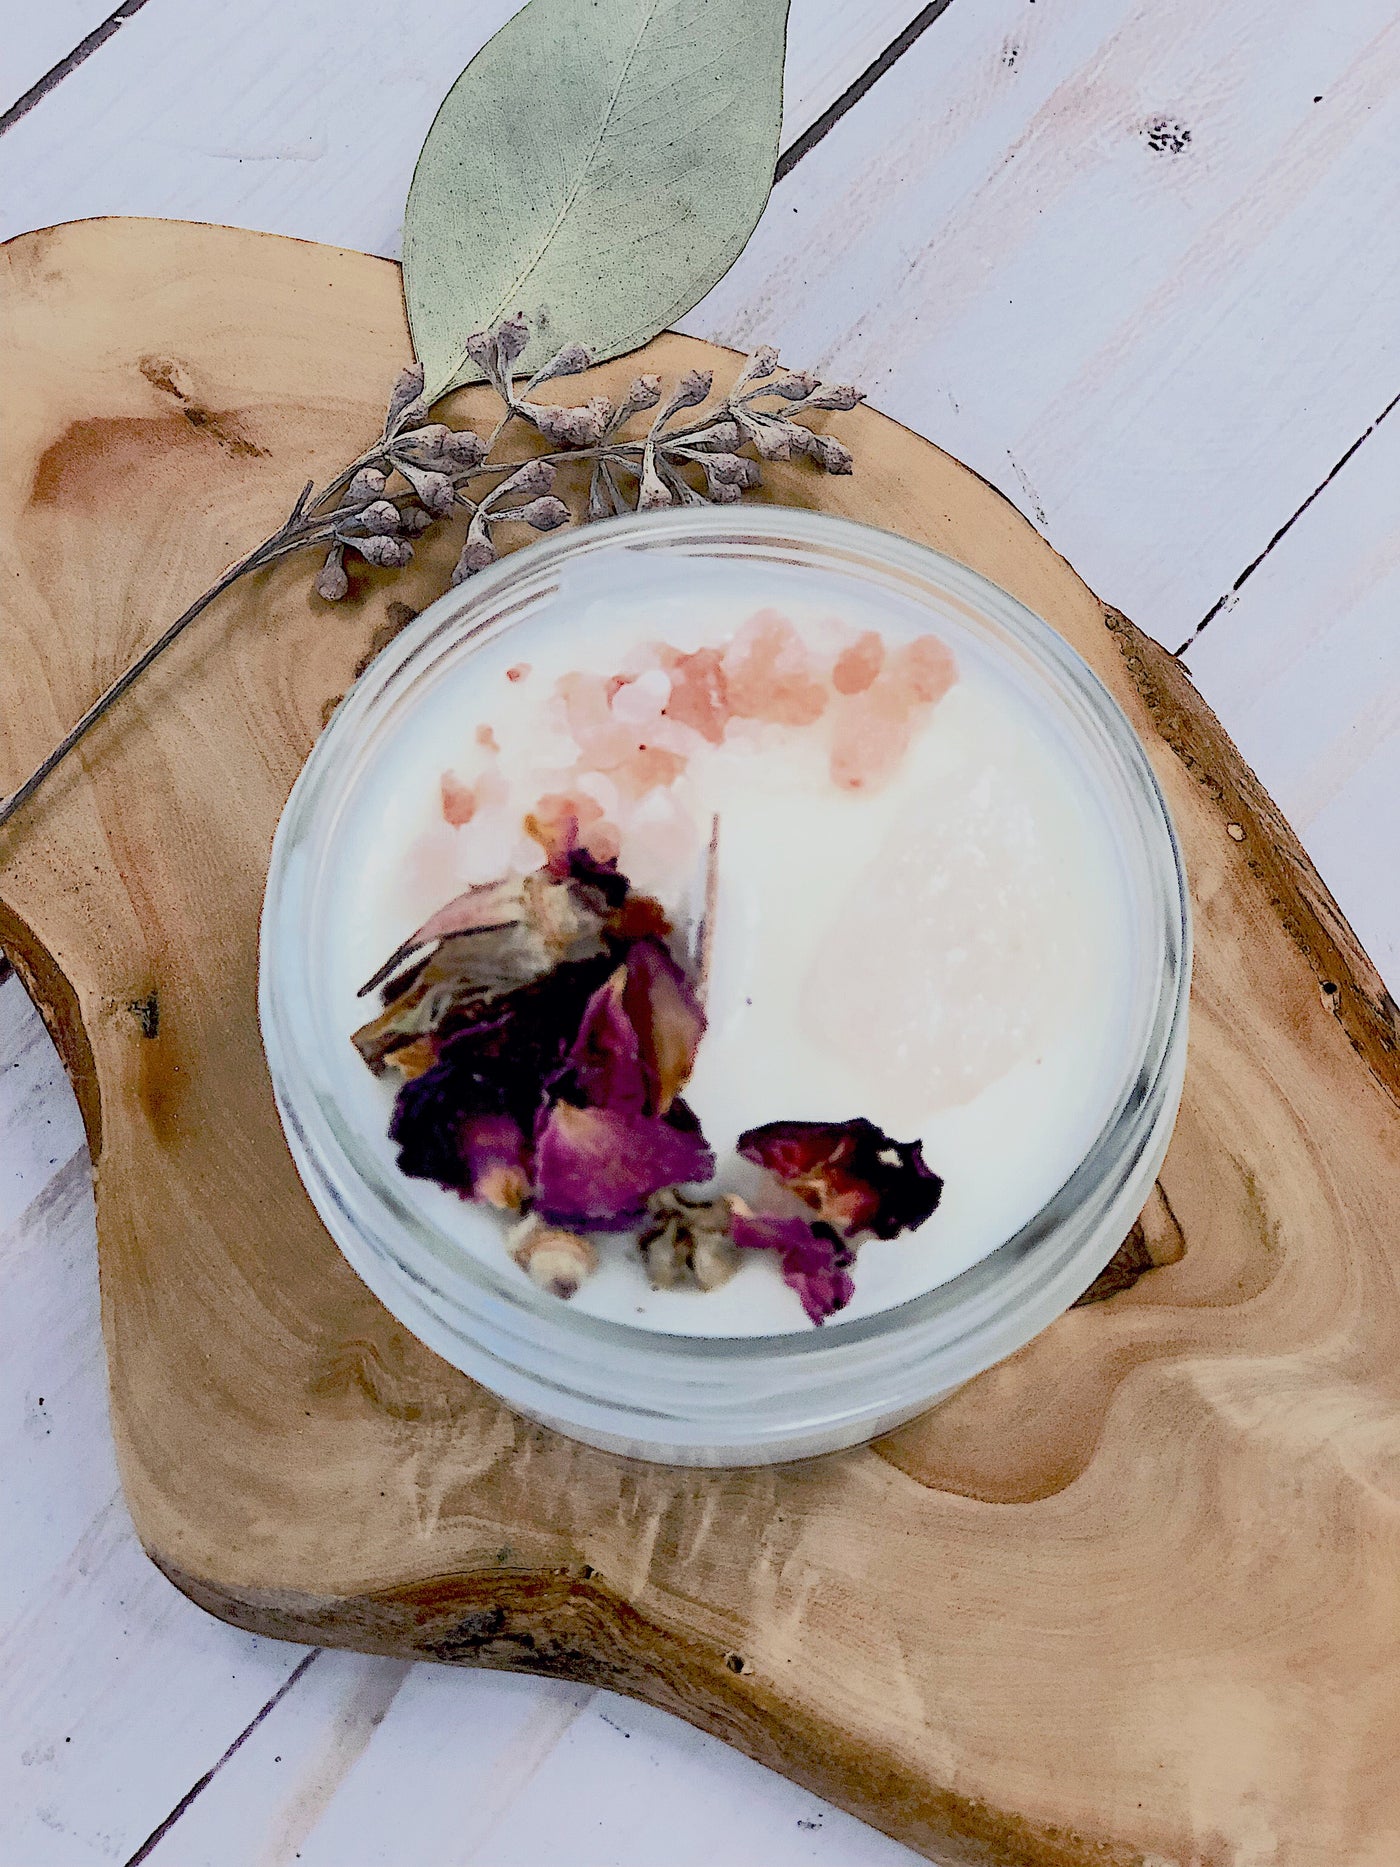 Organic Vegan Cruelty-Free Soy Wax love Spell Candle With Essential Oils and Crystals - Roses & Chains | Fashionable Clothing, Shoes, Accessories, & More